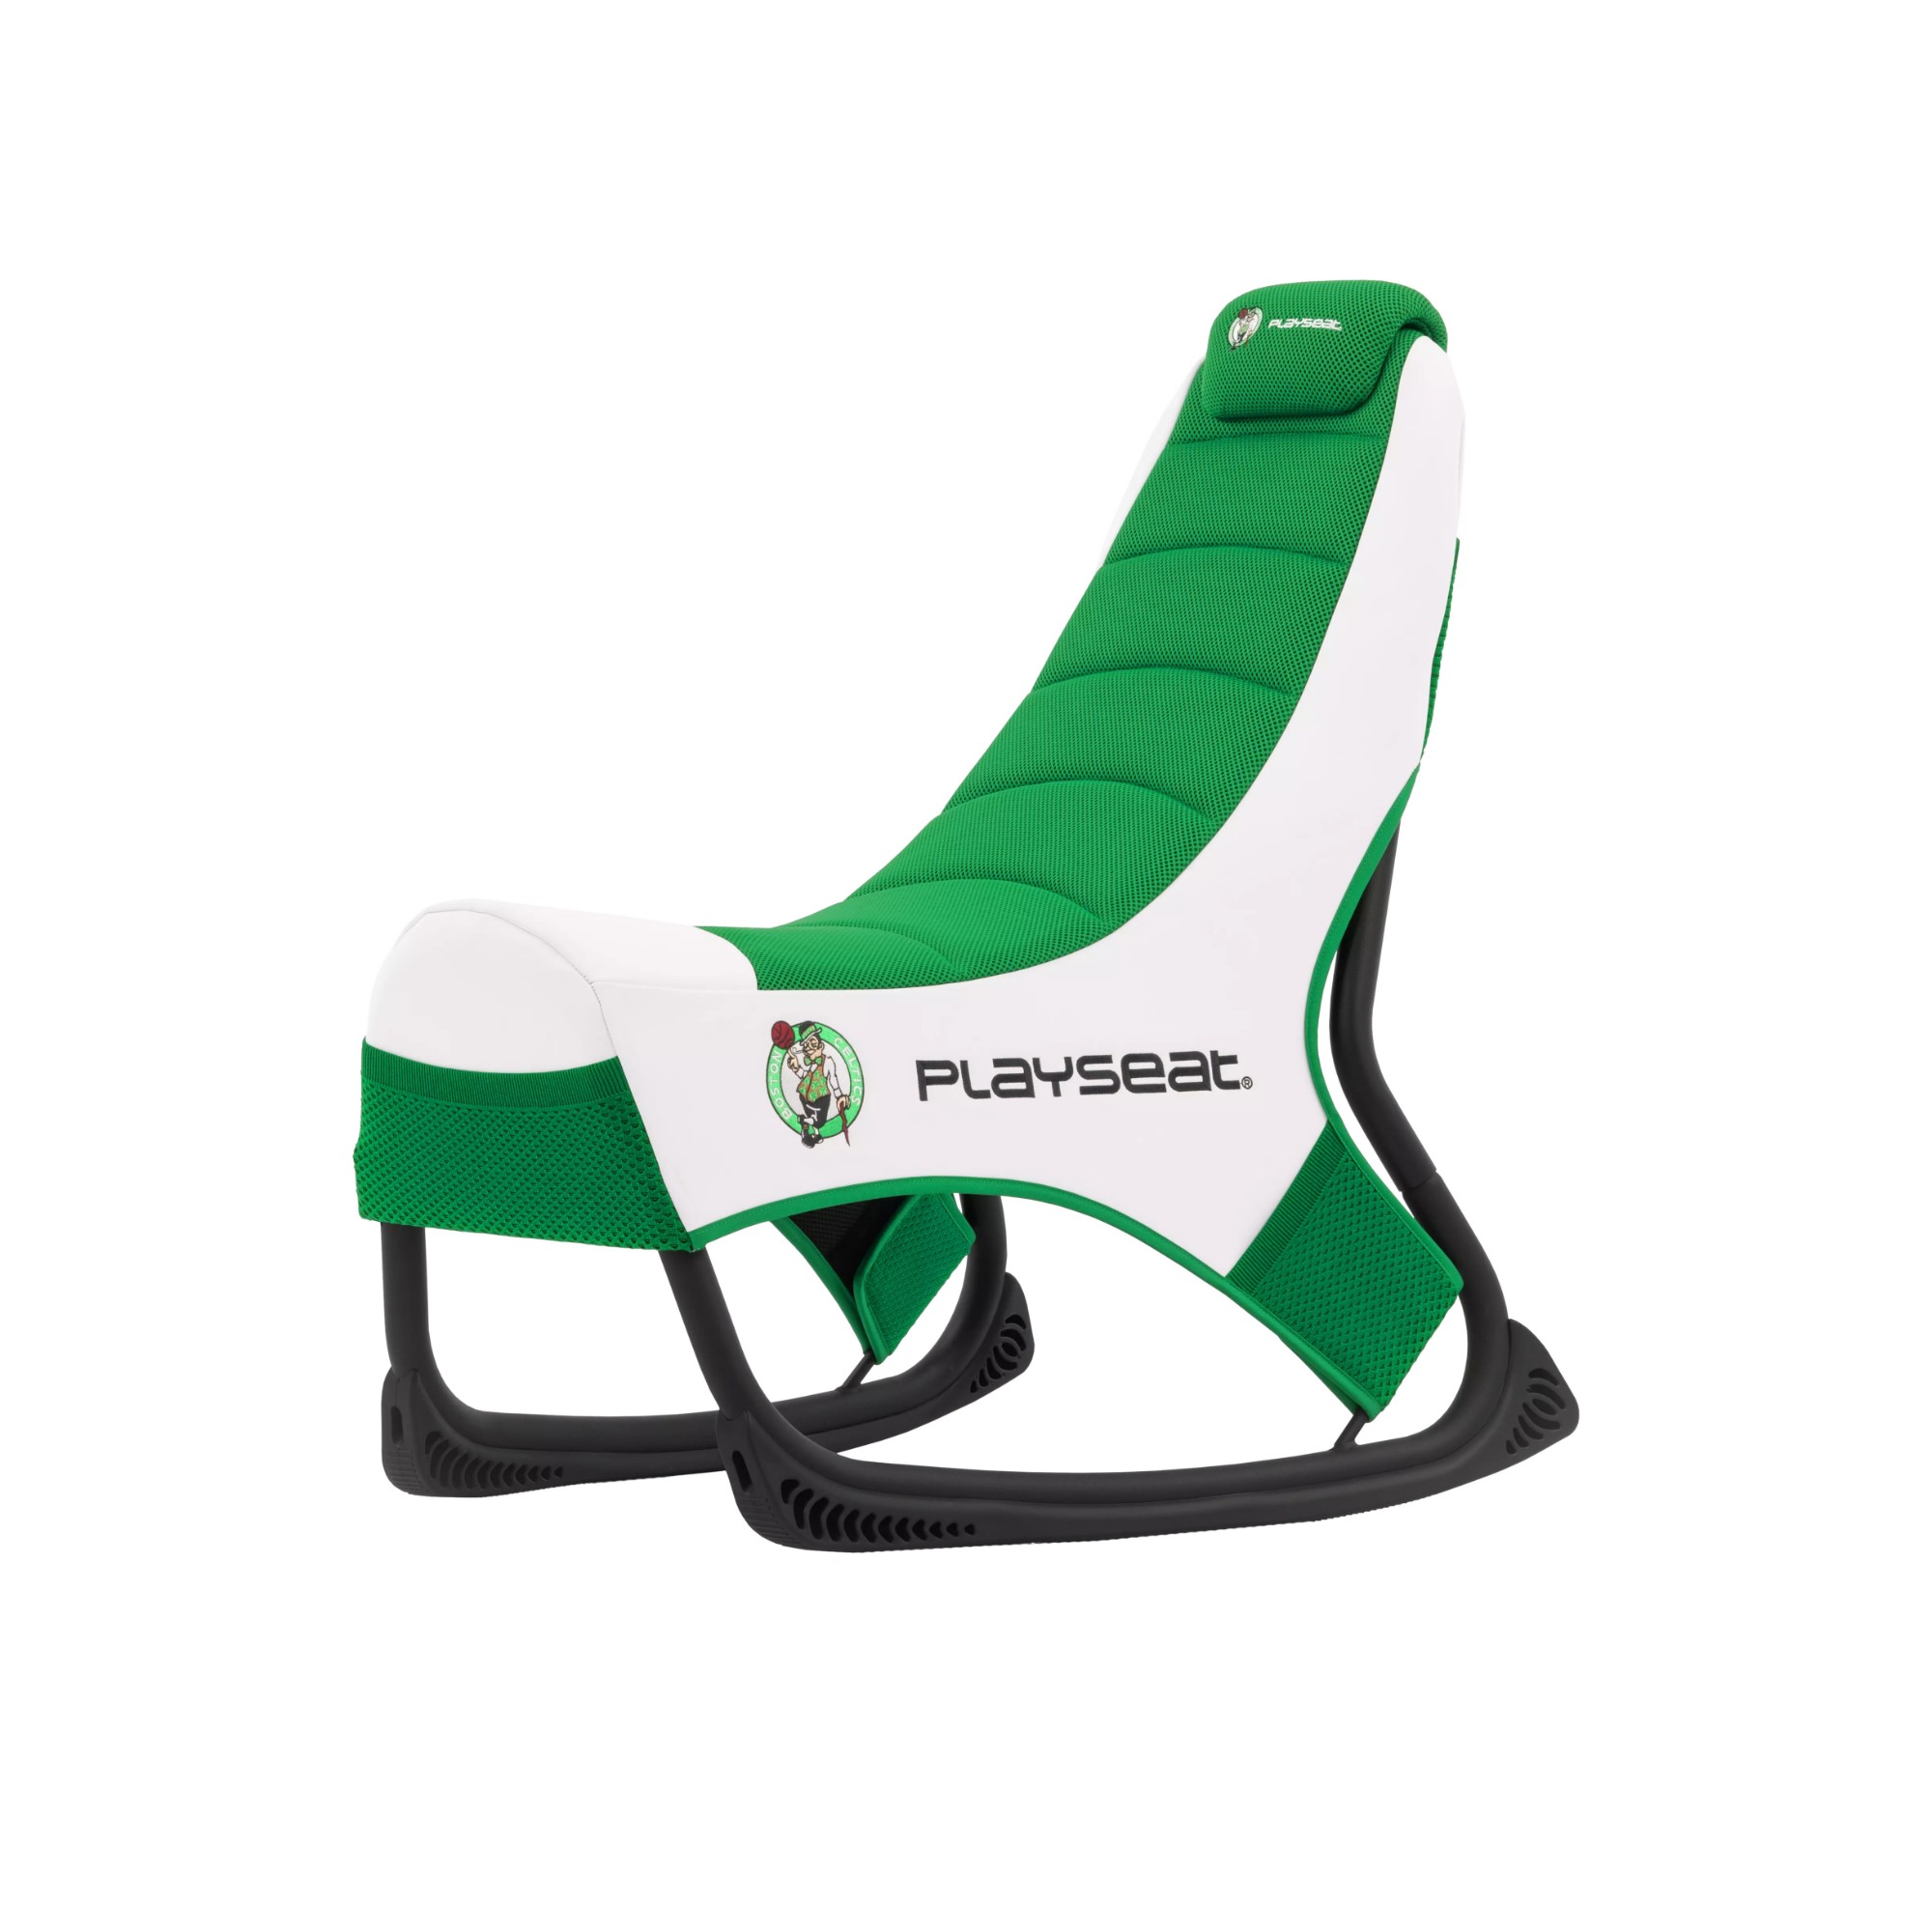 Photos - Computer Chair Playseat CHAMP NBA Console gaming chair Padded seat Green, White NBA.00274 